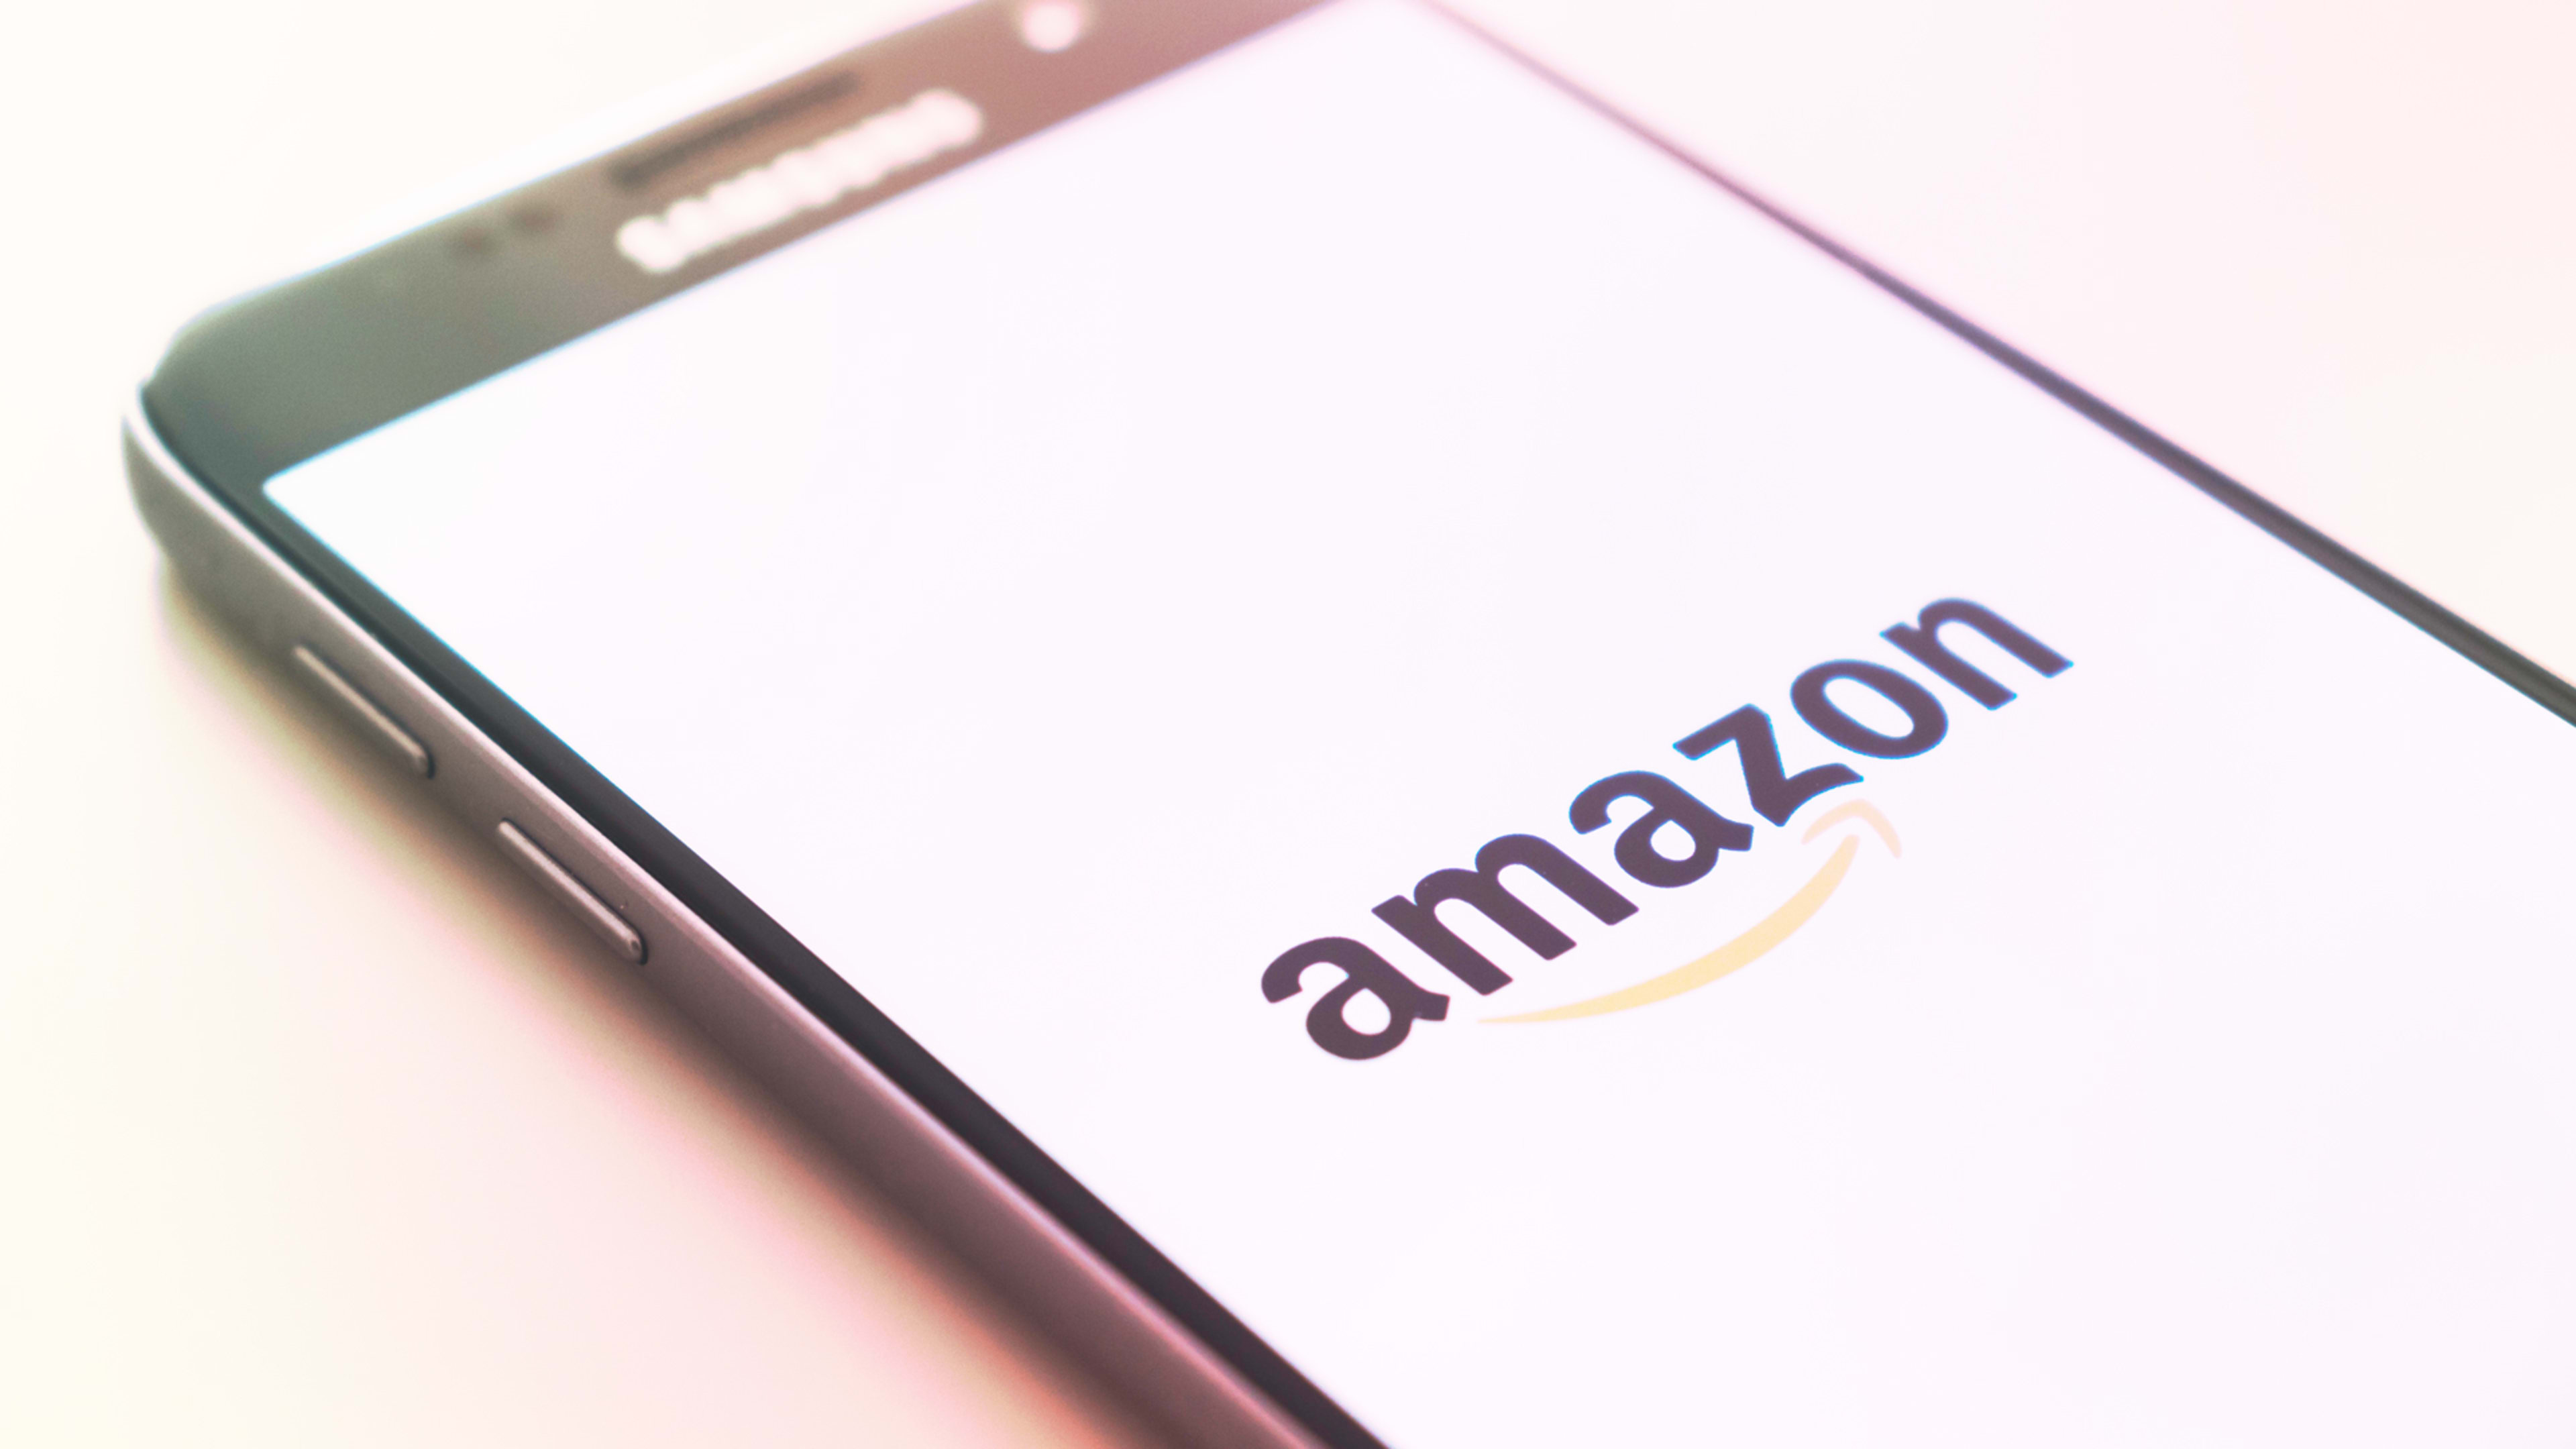 Amazon launches “Storefronts” to promote small businesses